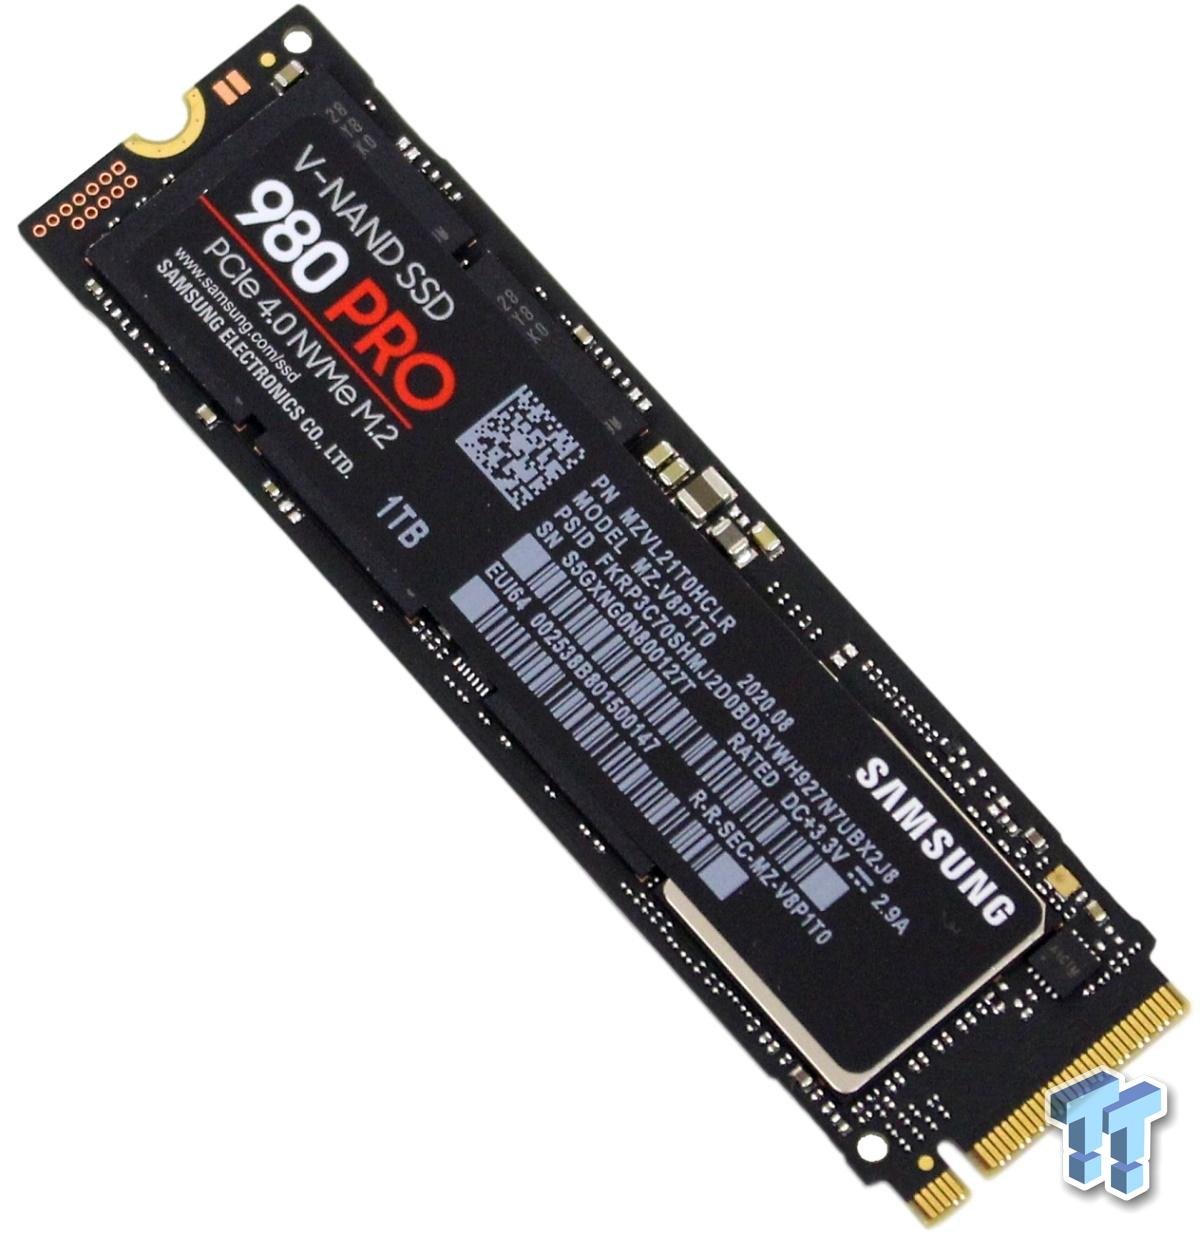 PC/タブレット PCパーツ Samsung 980 Pro 1TB M.2 NVMe SSD Review